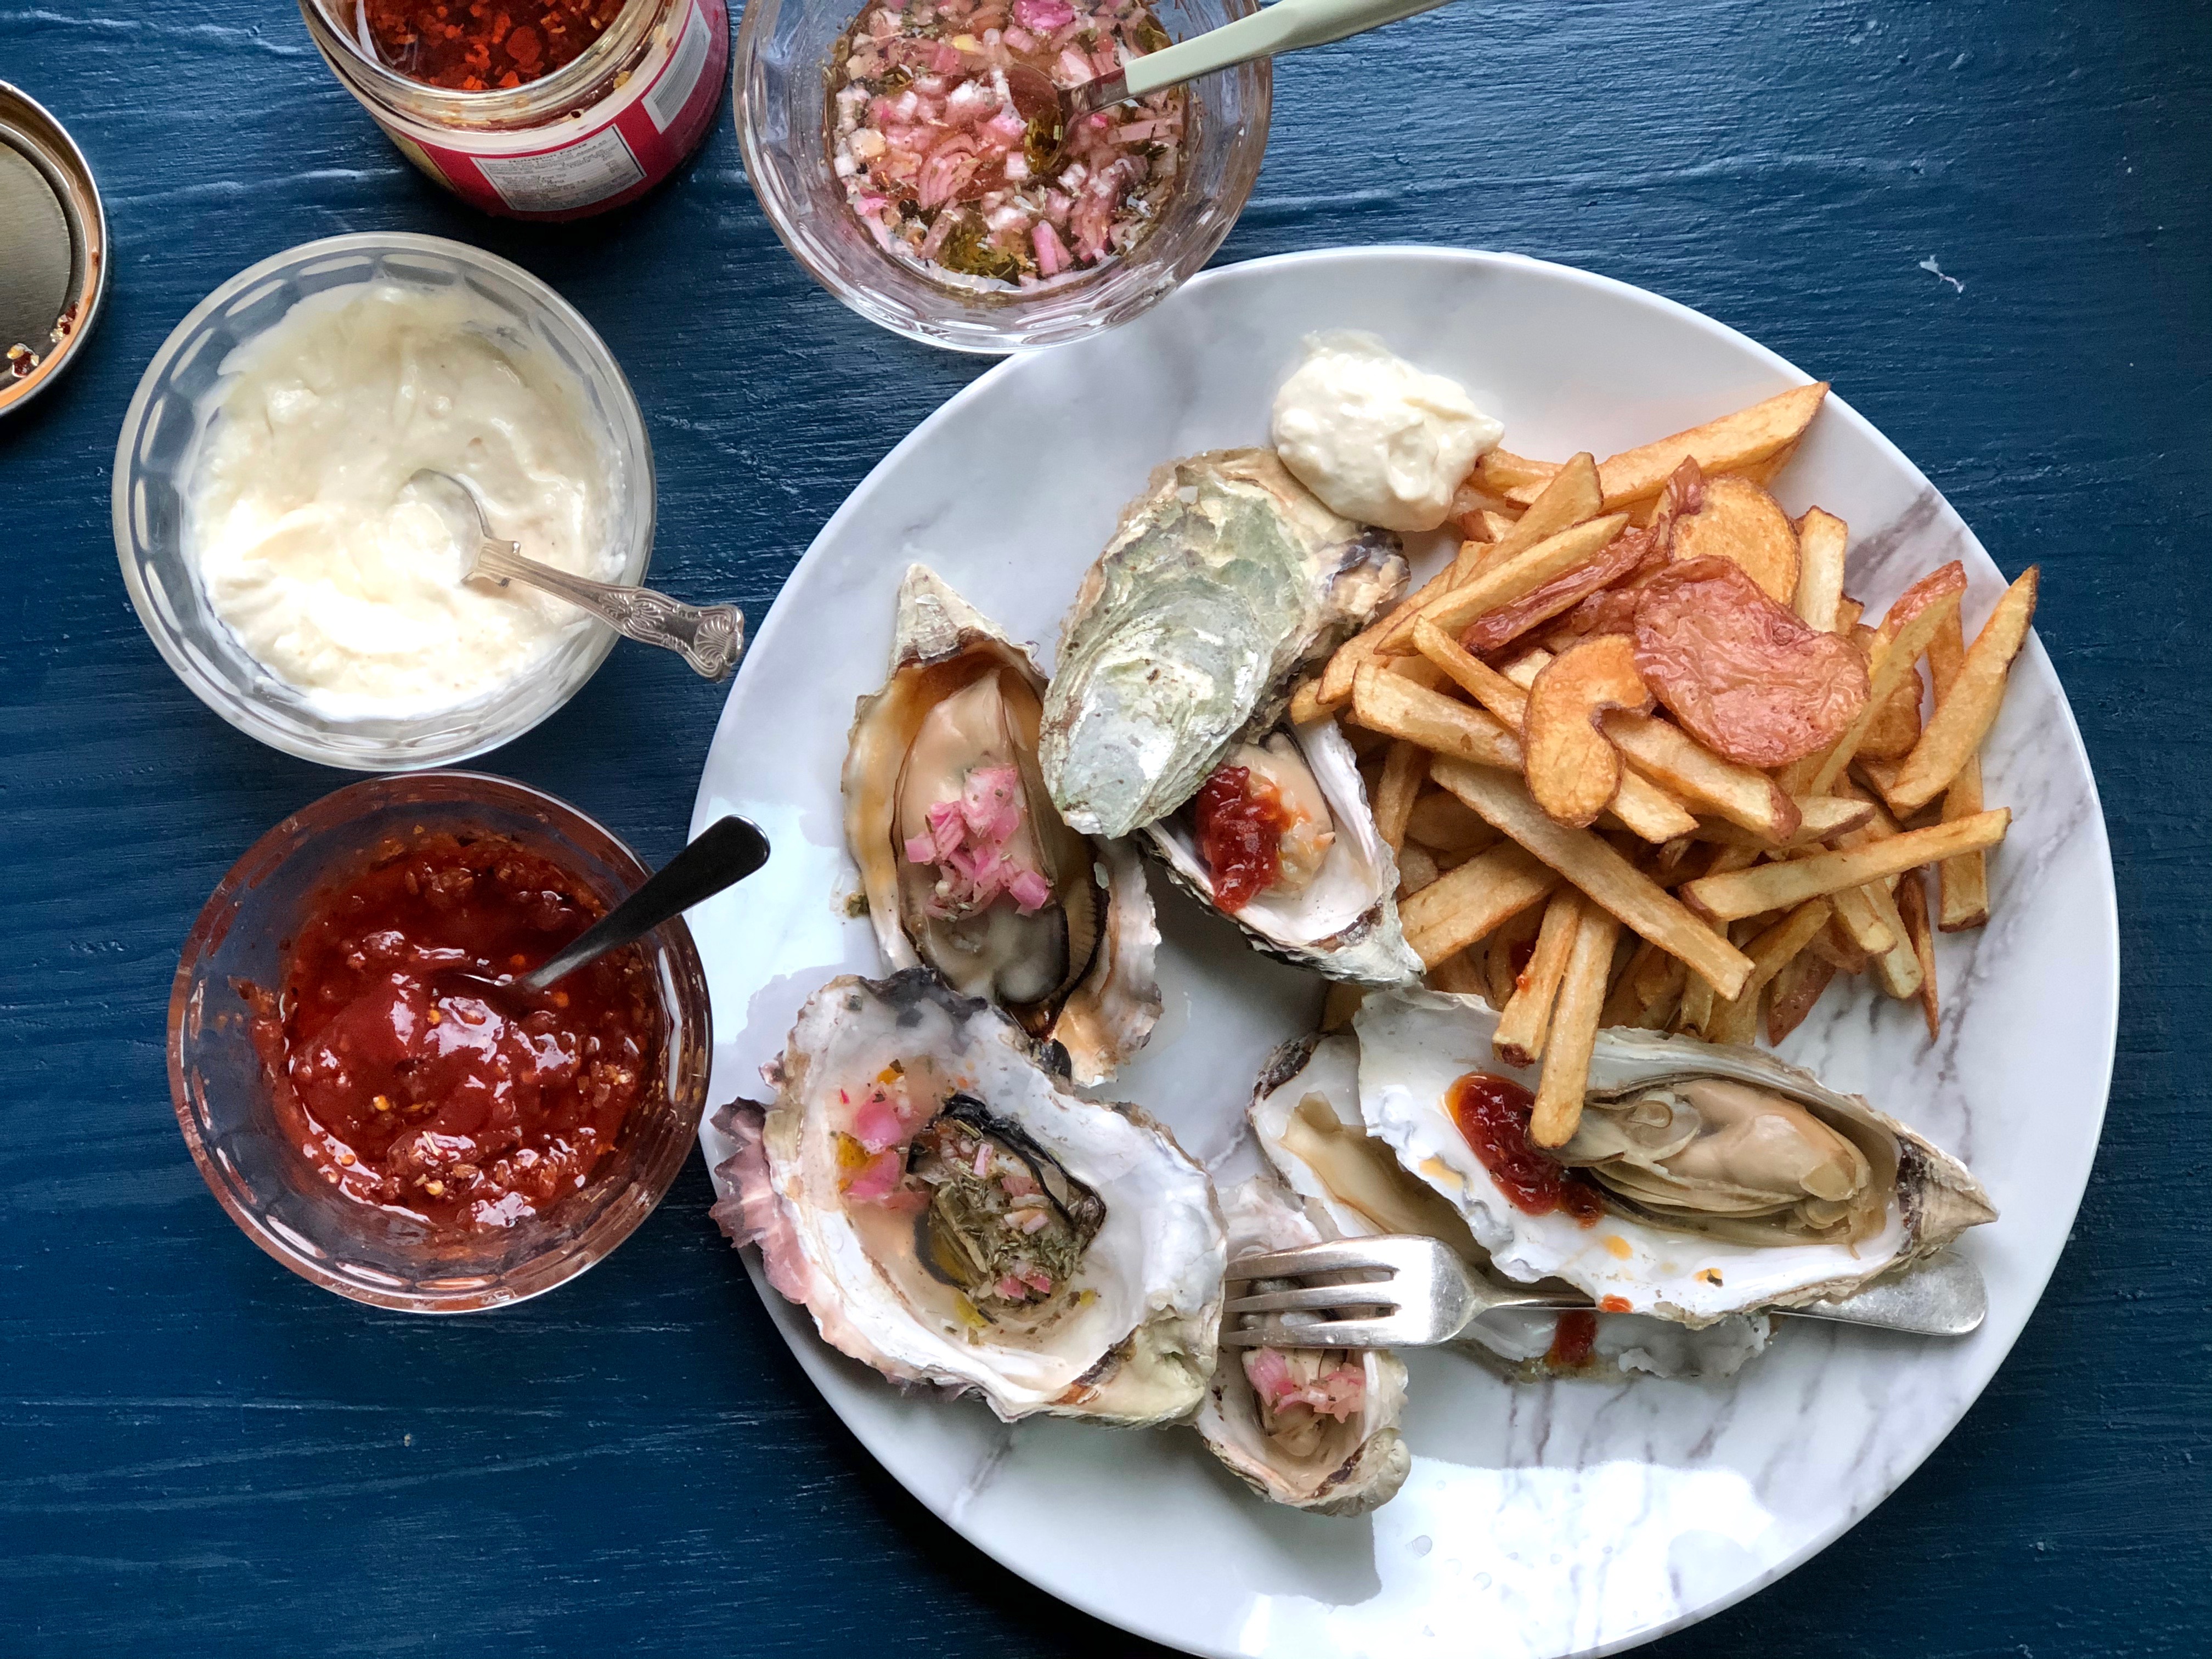 Featured image for “Steamed Oysters and Fries”